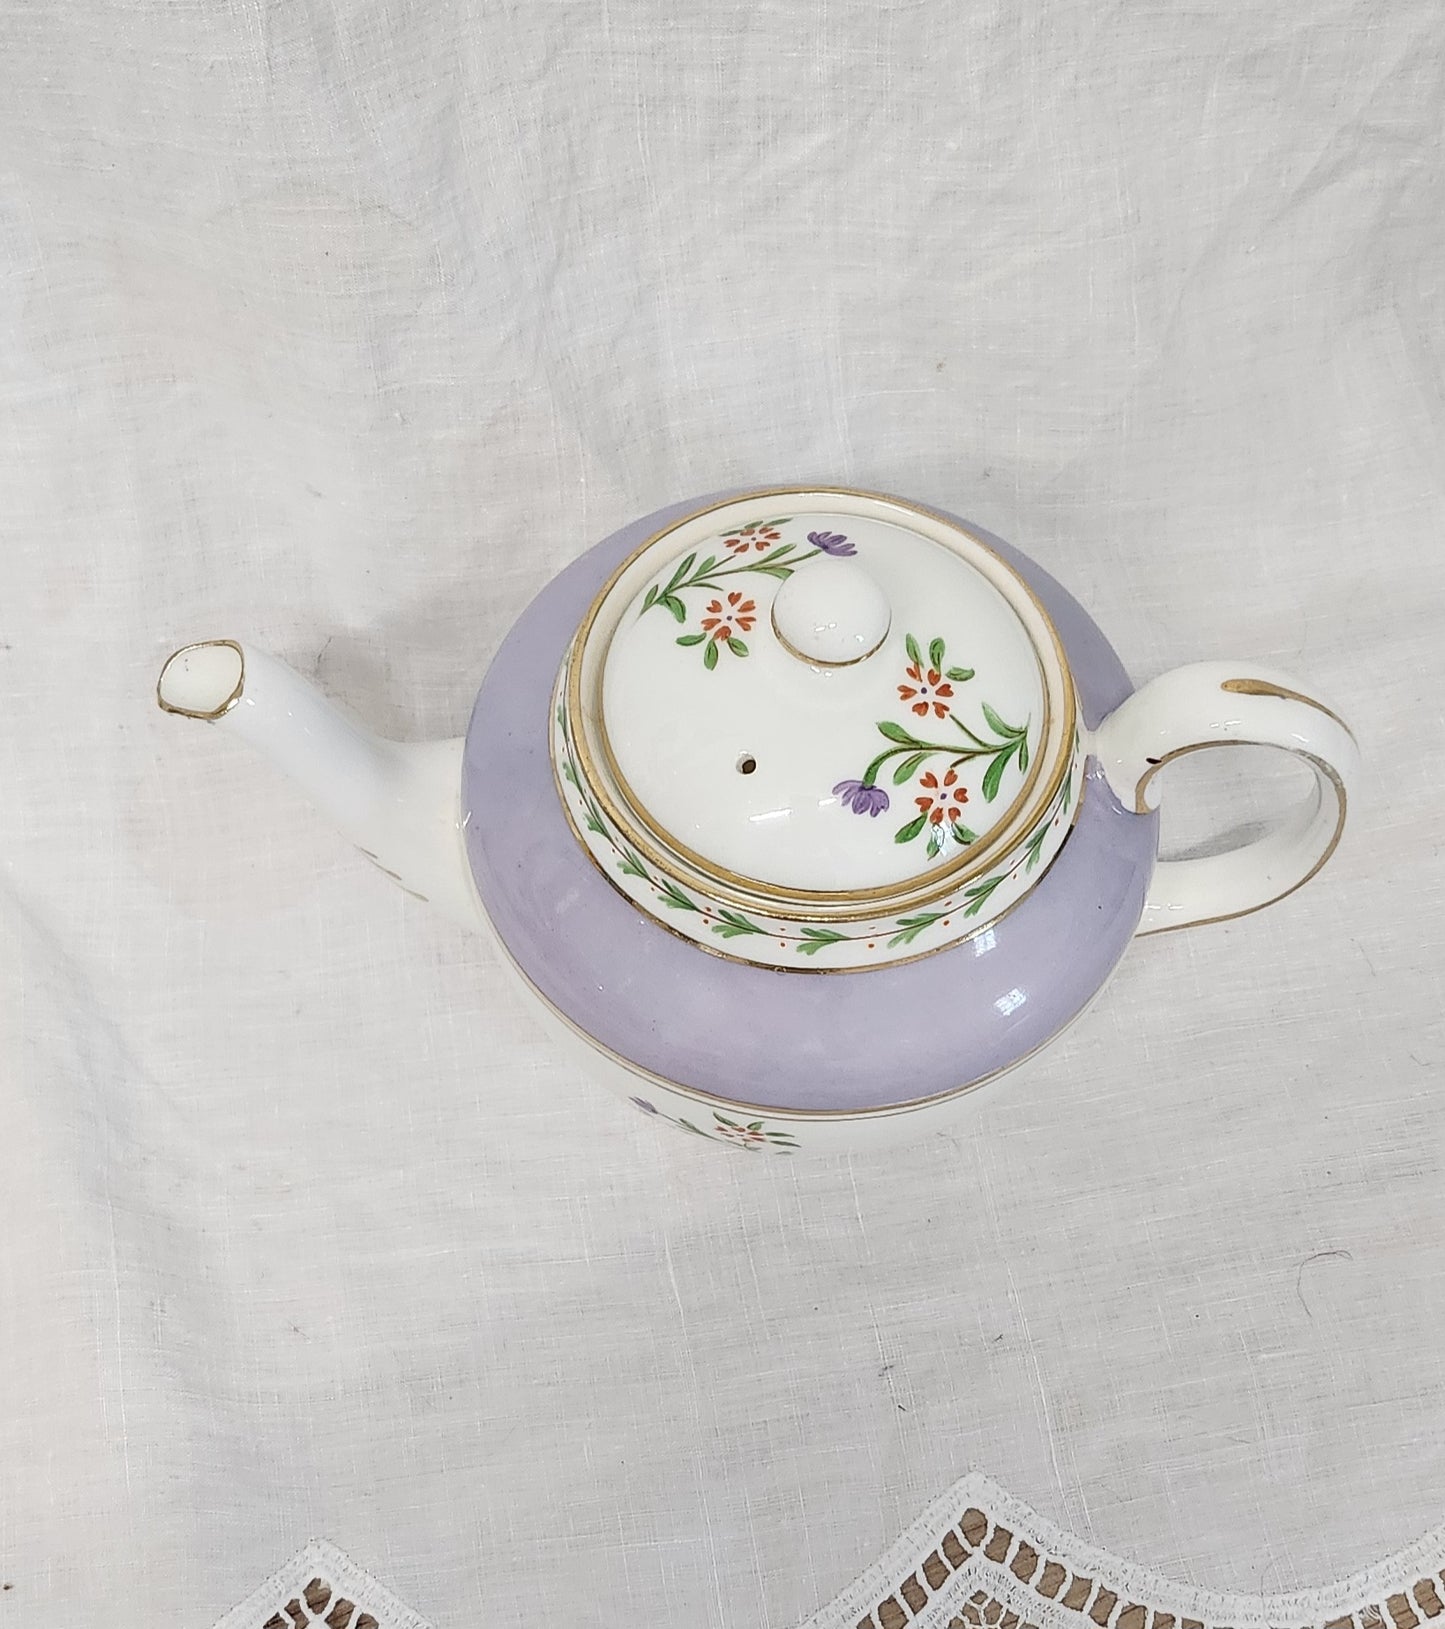 Rare Antique New Chelsea Handpainted Fine Bone China Tea pot - with minor line on rim and tea tainted in the pot